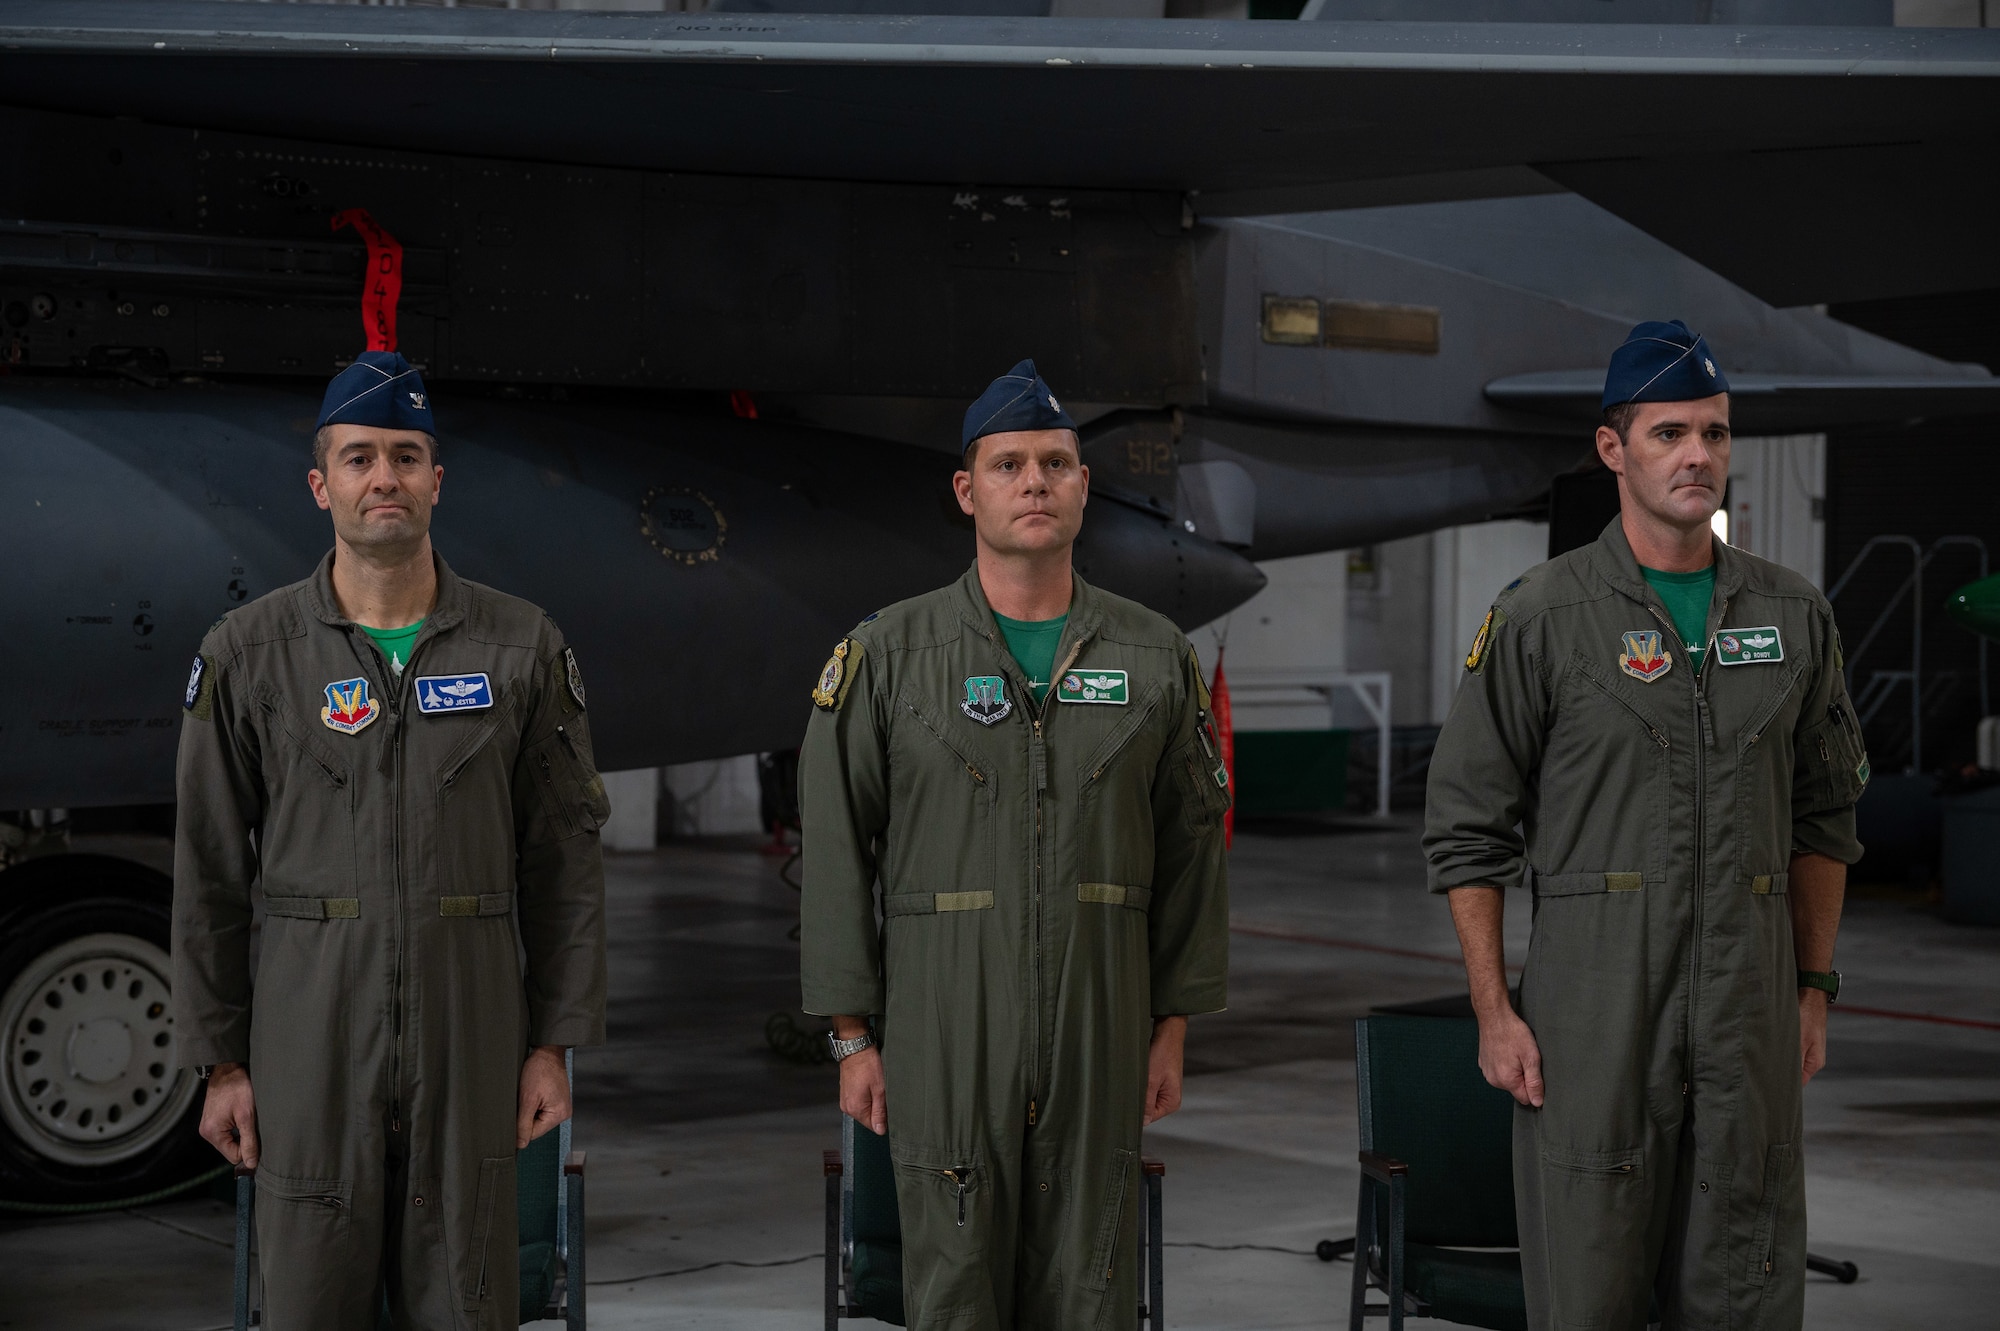 U.S. Air Force Col. Morgan P. Lohse, 4th Operations Group Commander, left, Lt. Col. John D. Rabun, former 335th Fighter Squadron Commander, middle, and Lt. Col. Kevin W. Murphy, 335th FS Commander, right, stand at attention during a change of command ceremony at Seymour Johnson Air Force Base, North Carolina, Dec. 8, 2023. The ceremony was conducted to commemorate the passing of command of the squadron from Rabun to Murphy. (U.S. Air Force photo by Airman 1st Class Leighton Lucero)